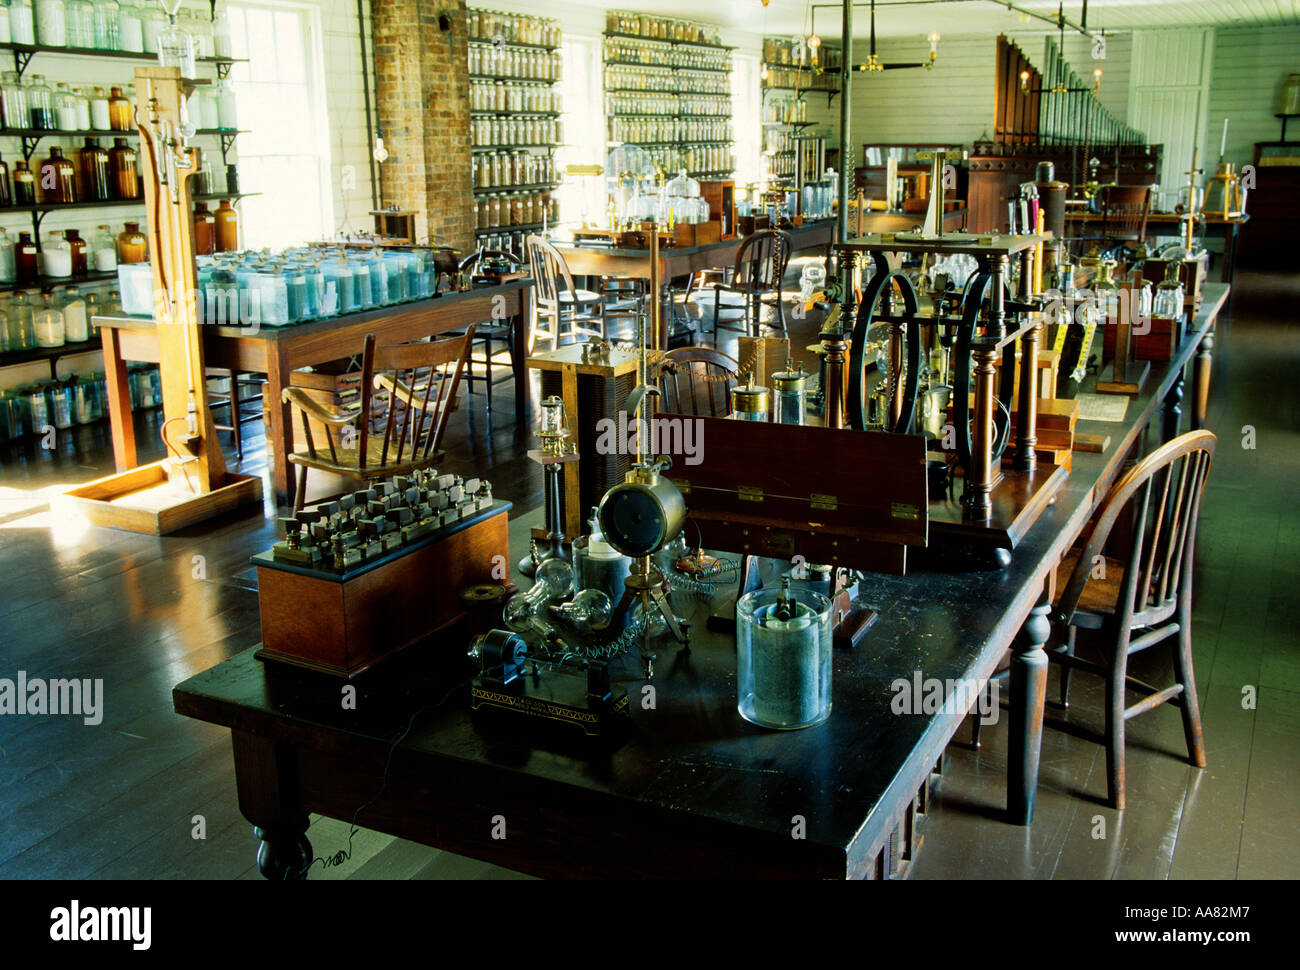 Thomas Edison Menlo Park Laboratory replicated at The Henry Ford Greenfield Village, Dearborn Michigan, USA Stock Photo